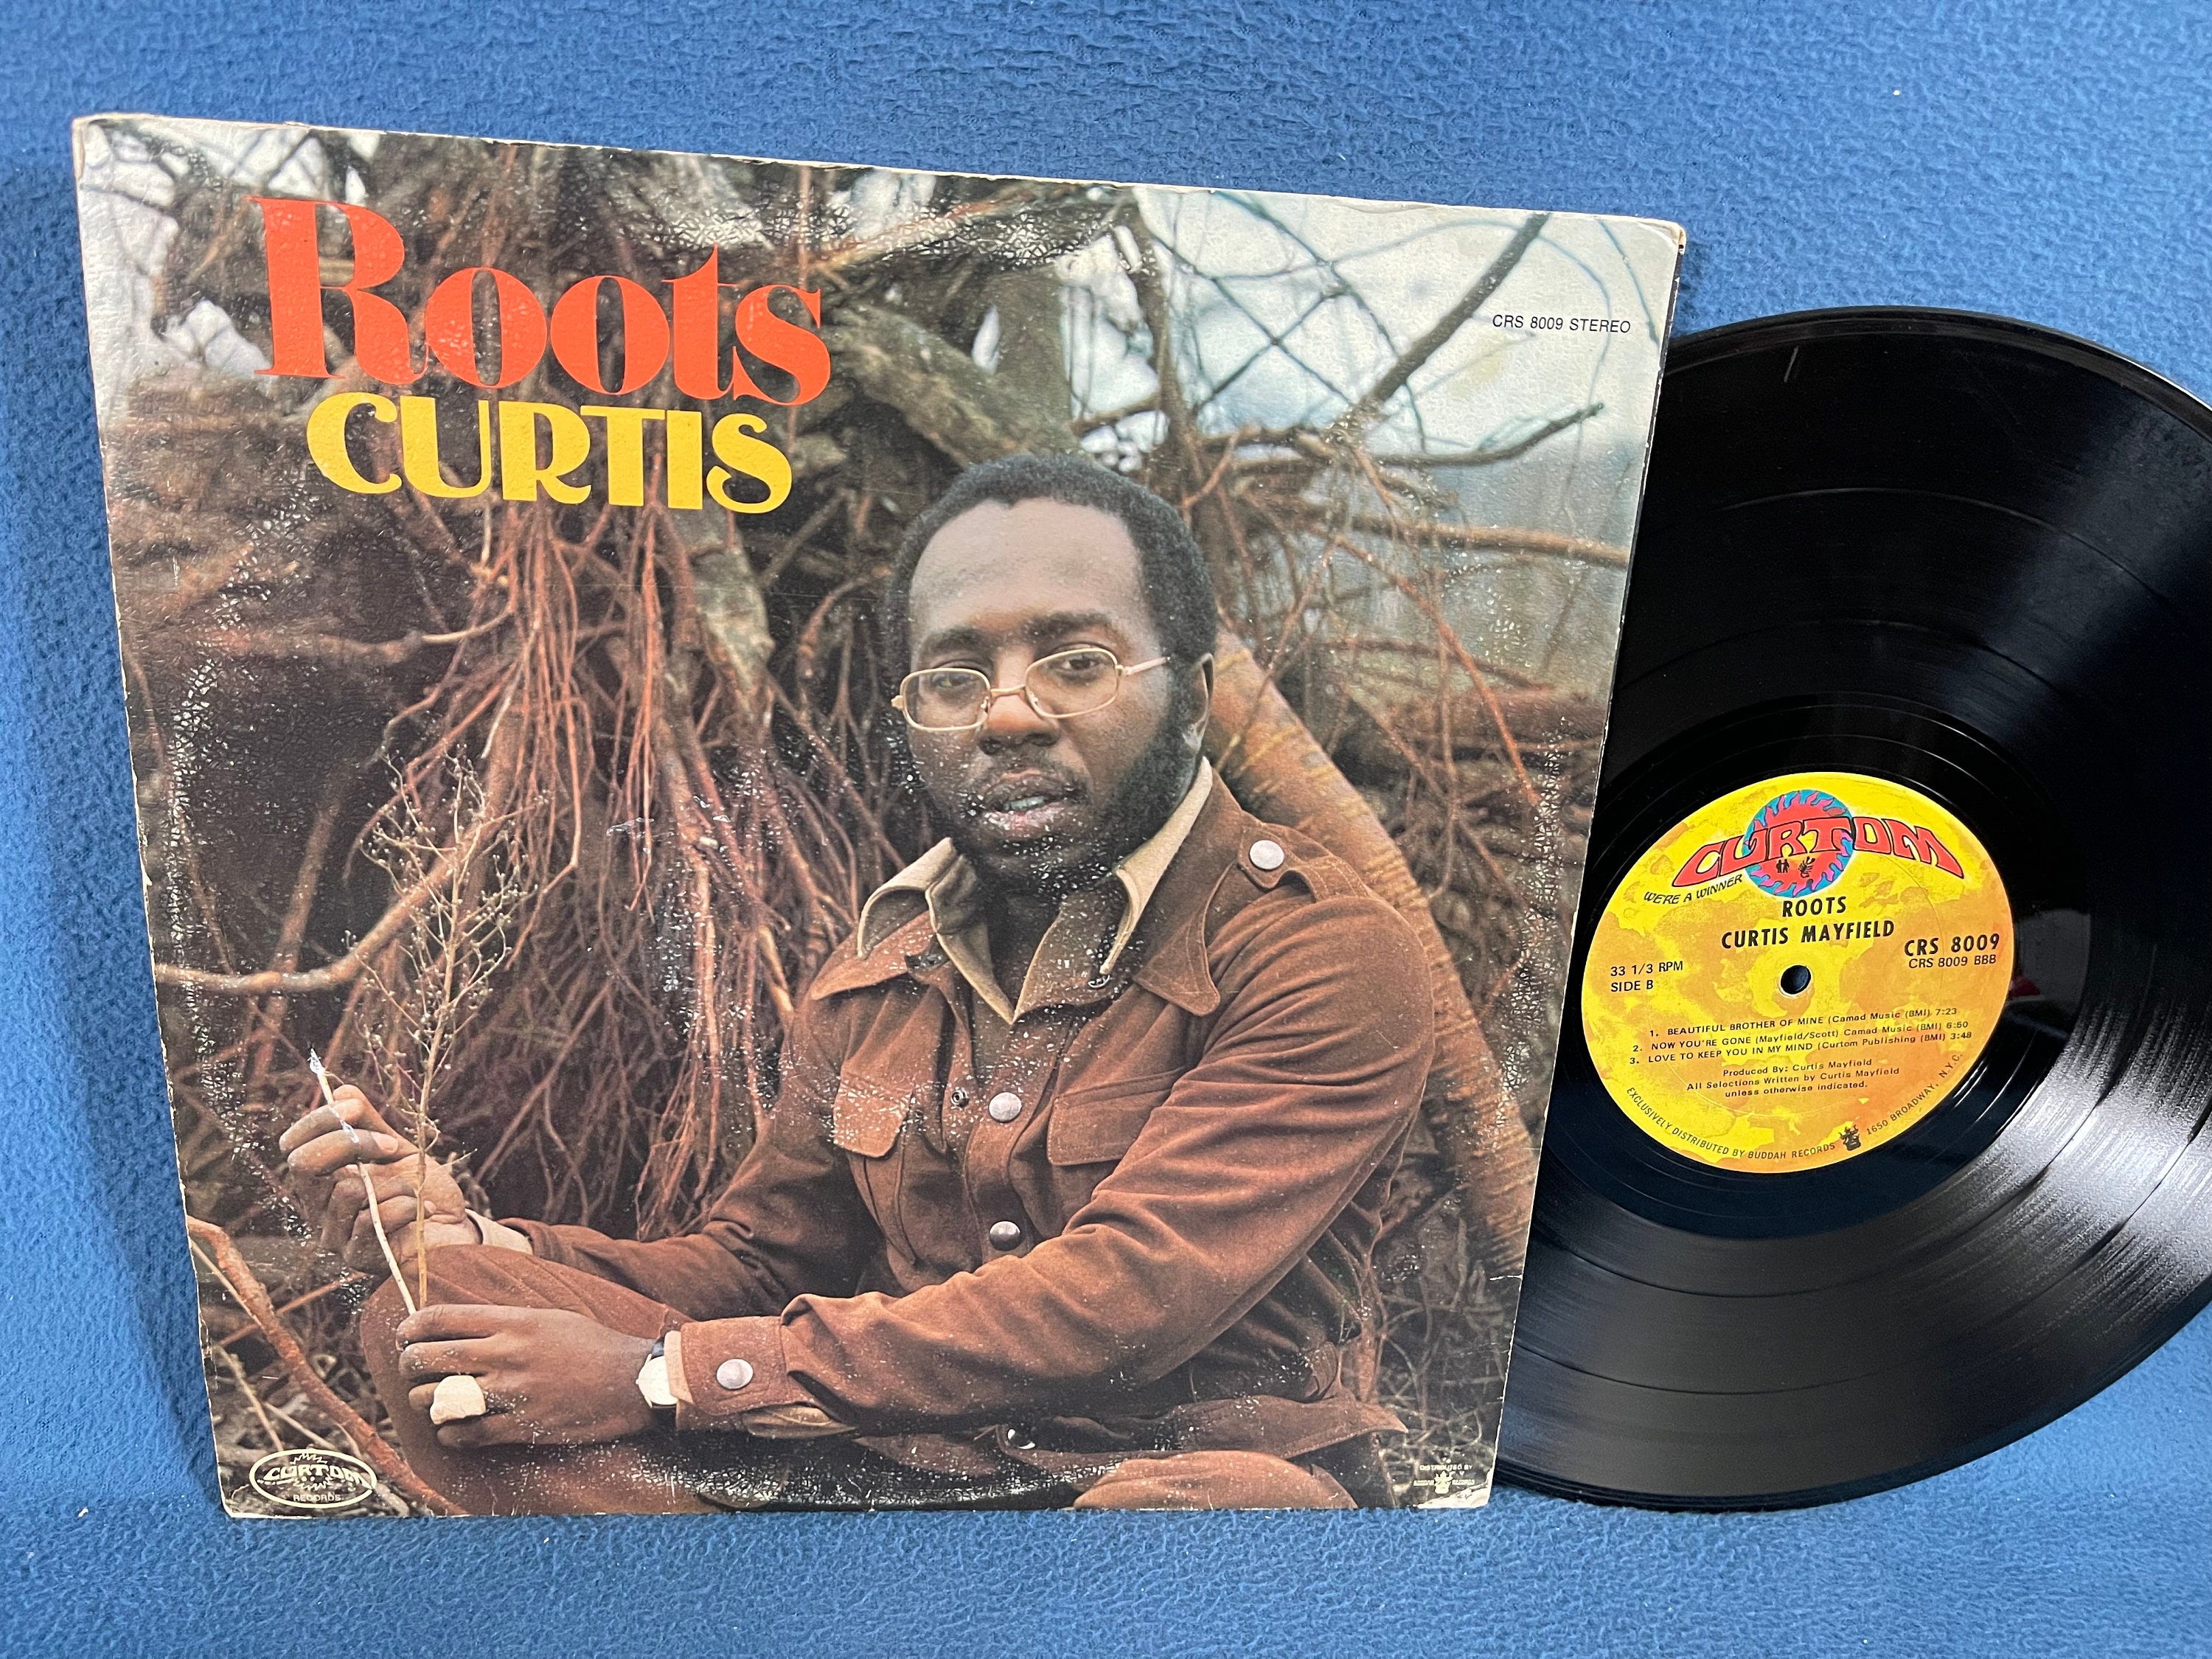  Curtis Mayfield - Give, Get, Take And Have - Lp Vinyl Record:  CDs & Vinyl